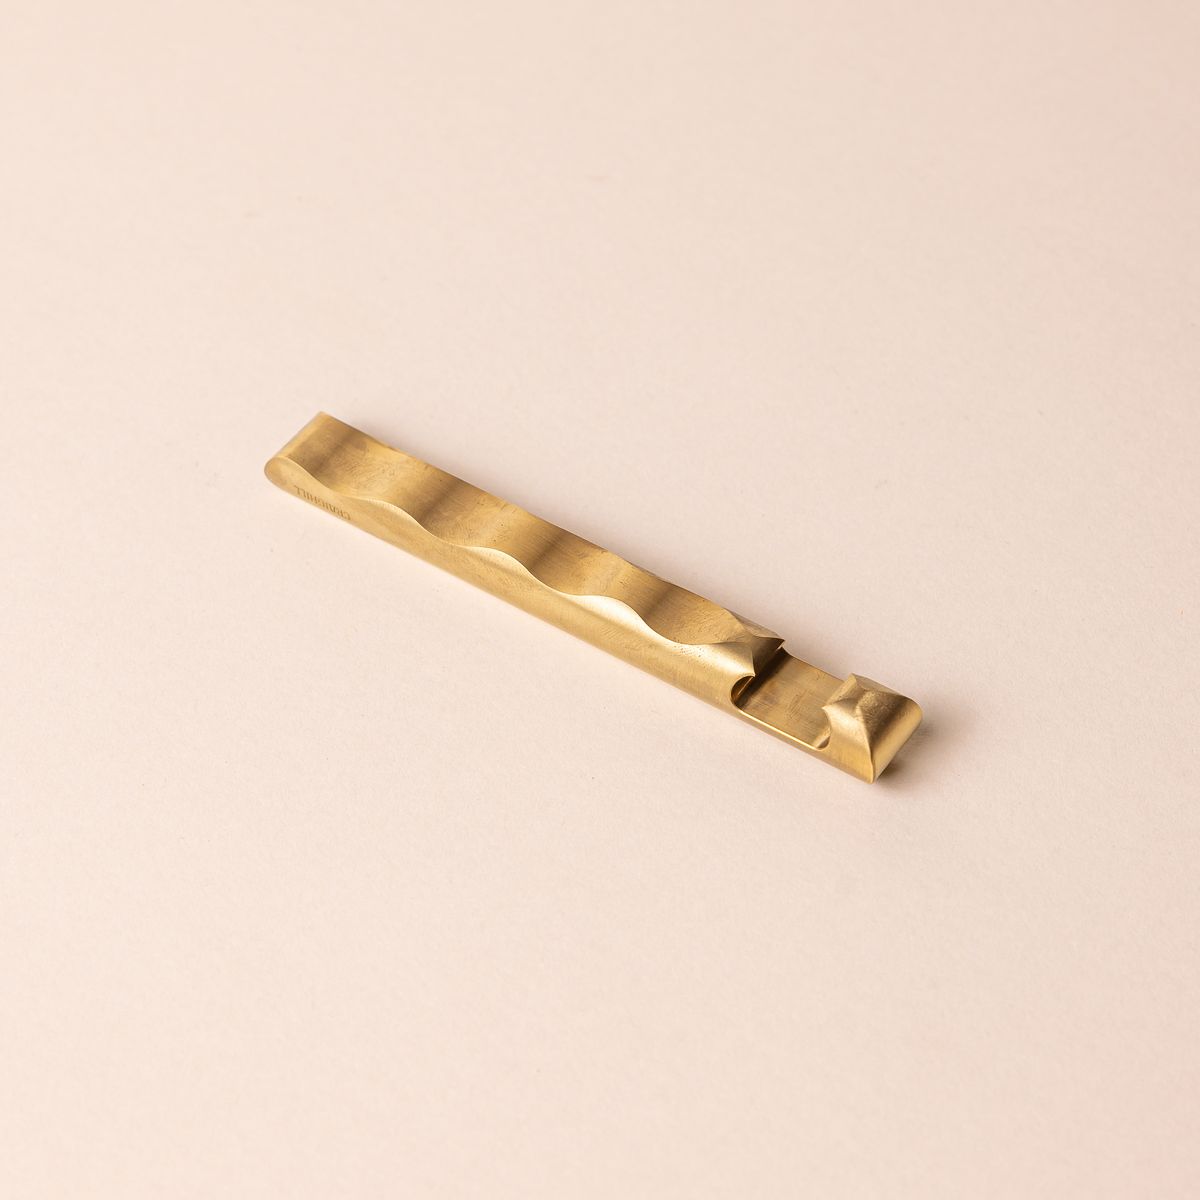 Sophisticated brass bottle opener with a simple design and a wave with grooves all along the opener side.